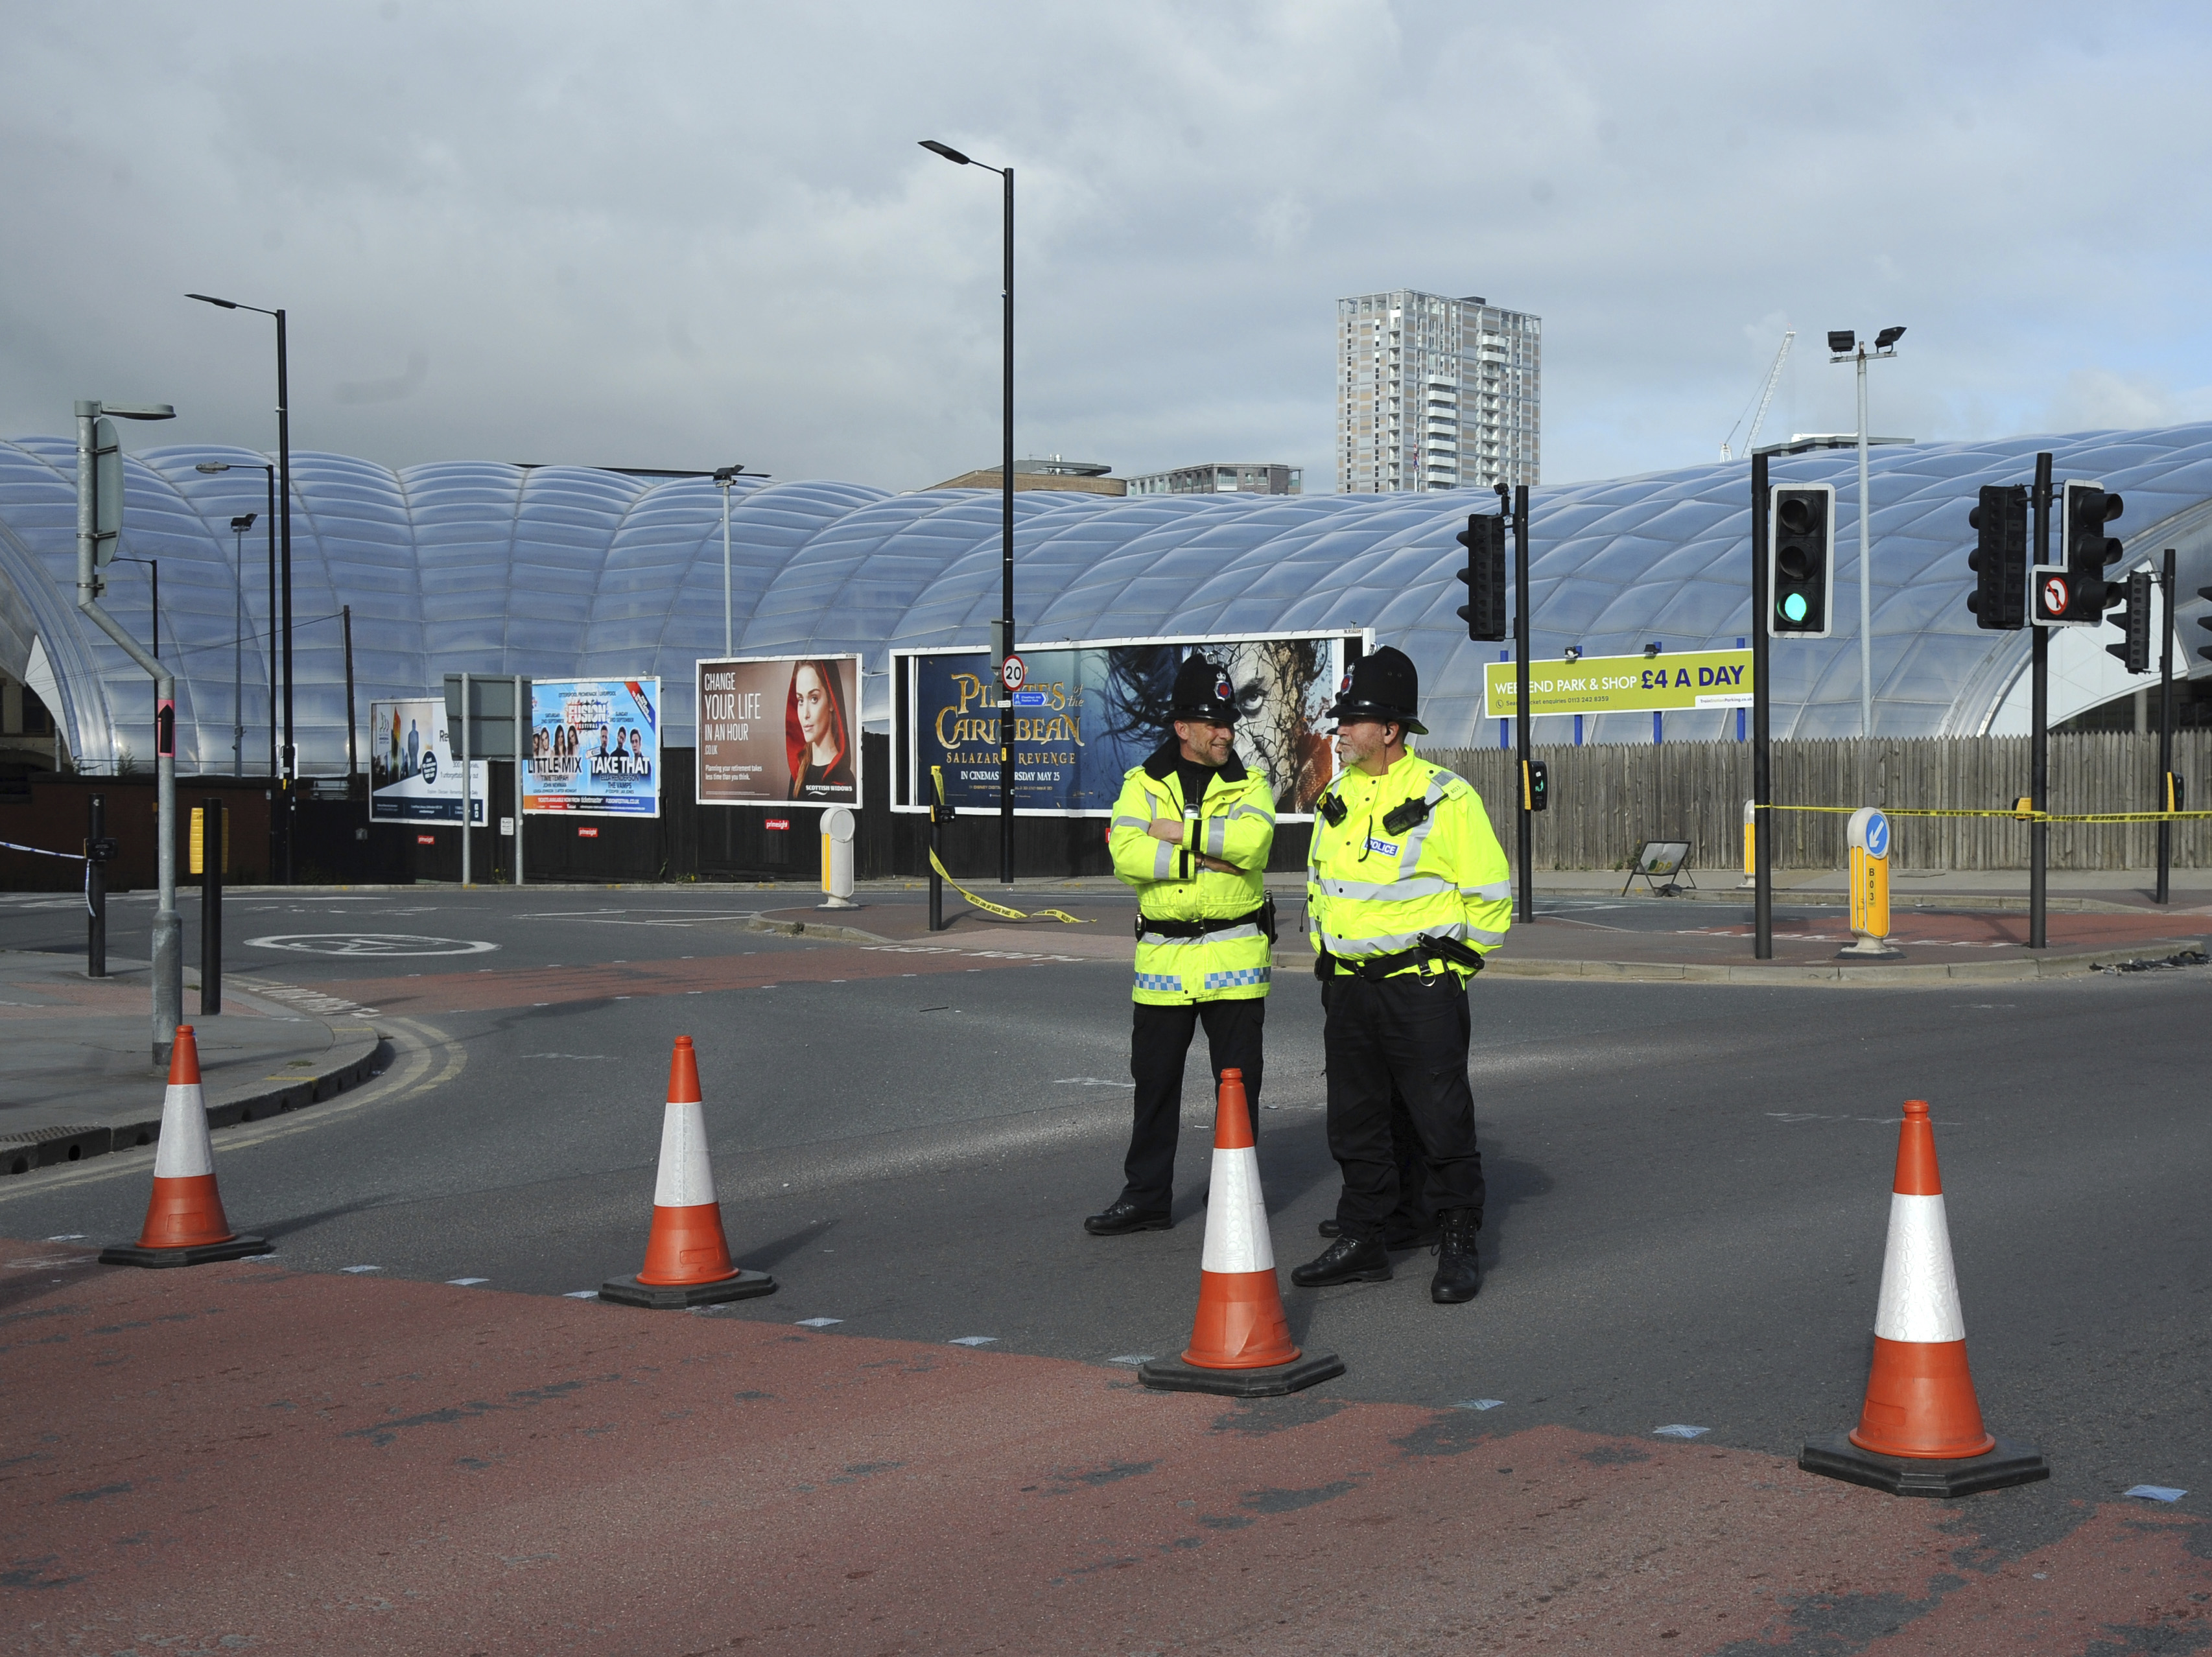 Police block a road outside the Manchester Arena in central Manchester, England Tuesday May 23, 2017. An apparent suicide bomber set off an improvised explosive device that killed over a dozen people at the end of an Ariana Grande concert on Monday, Manchester police said Tuesday. (AP Photo/Rui Vieira)